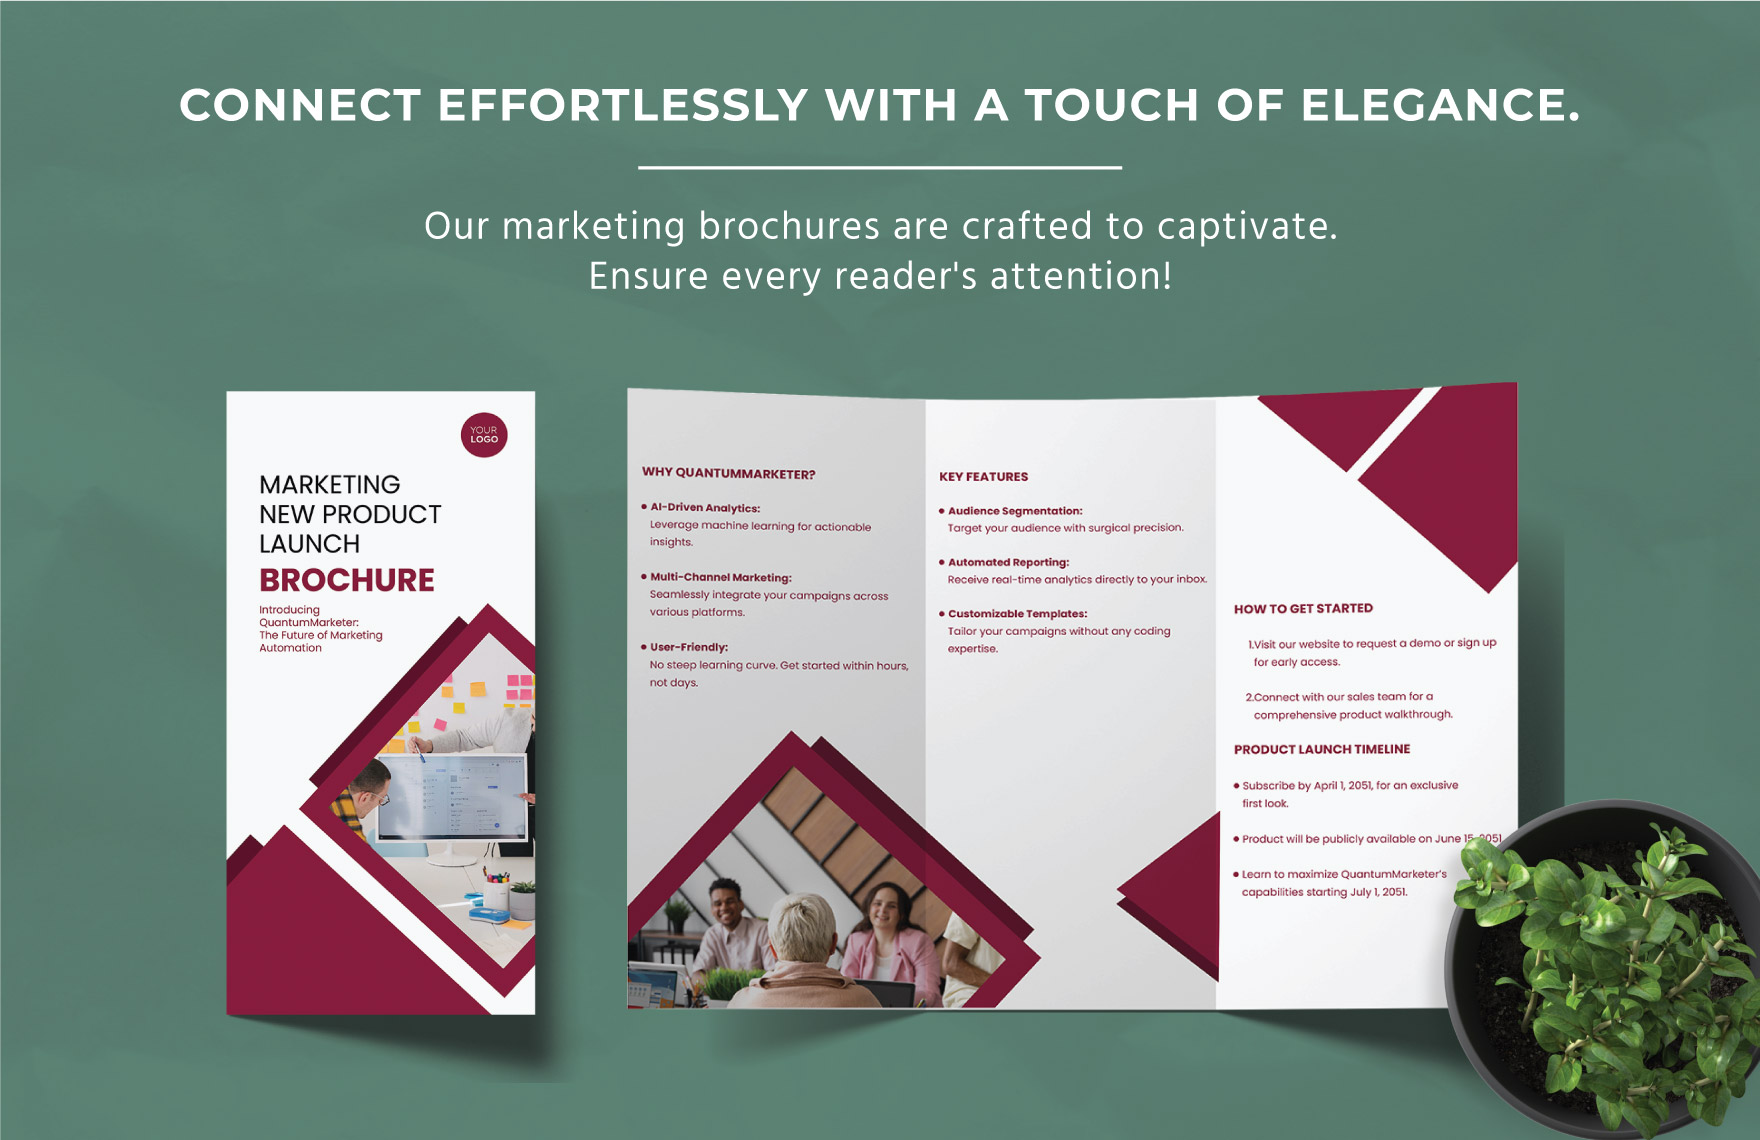 Marketing New Product Launch Brochure Template